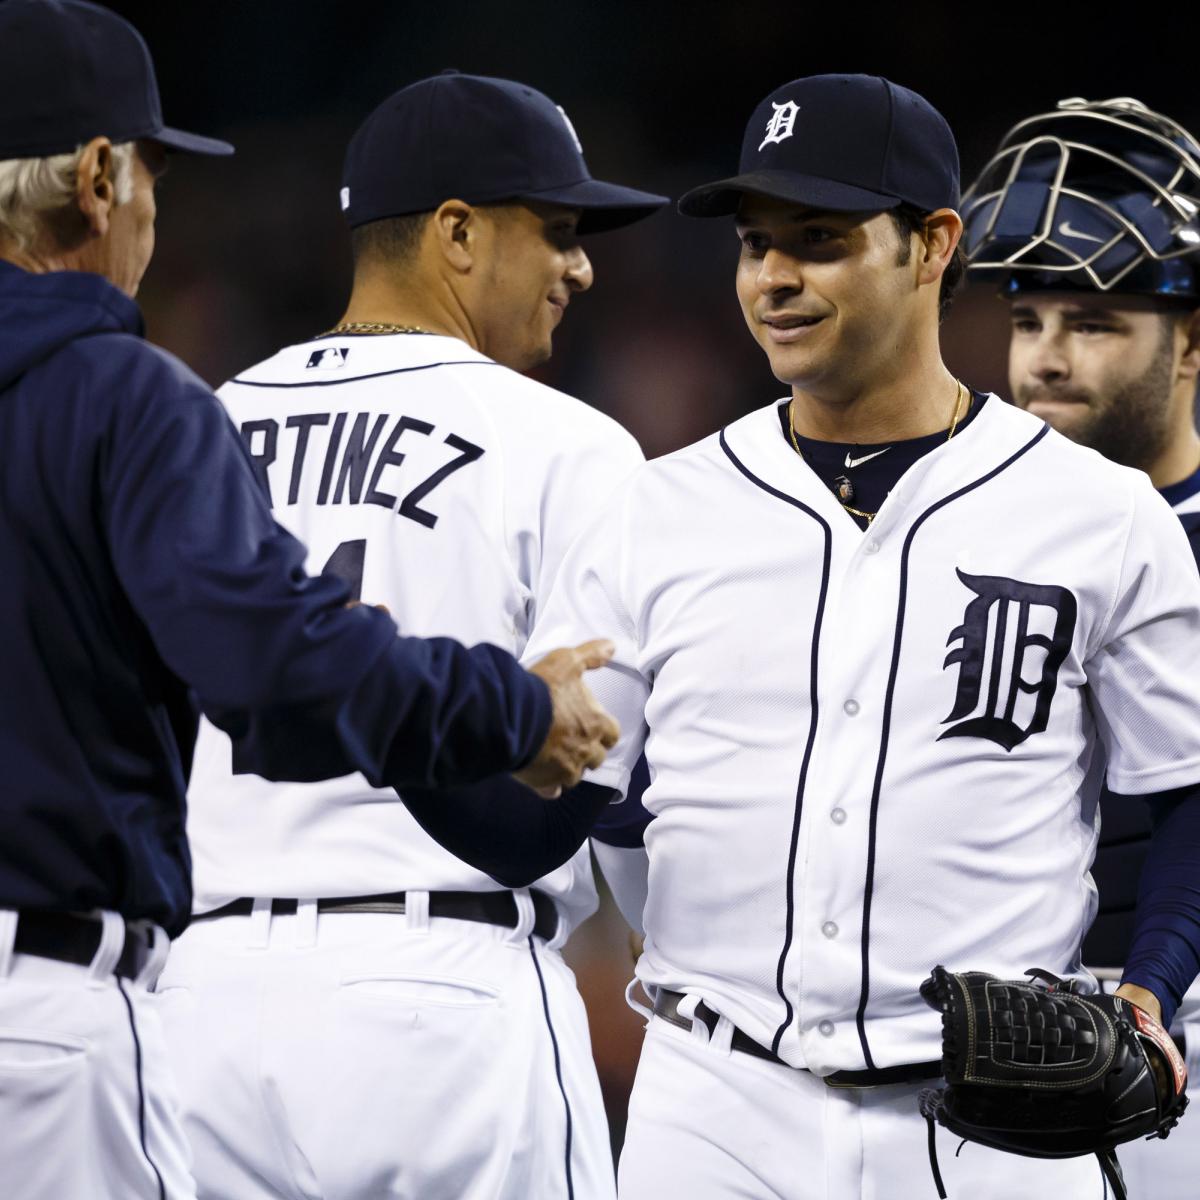 Anibal Sanchez's 1-Hit Shutout: Another MLB No-Hitter Effort Goes by the Wayside